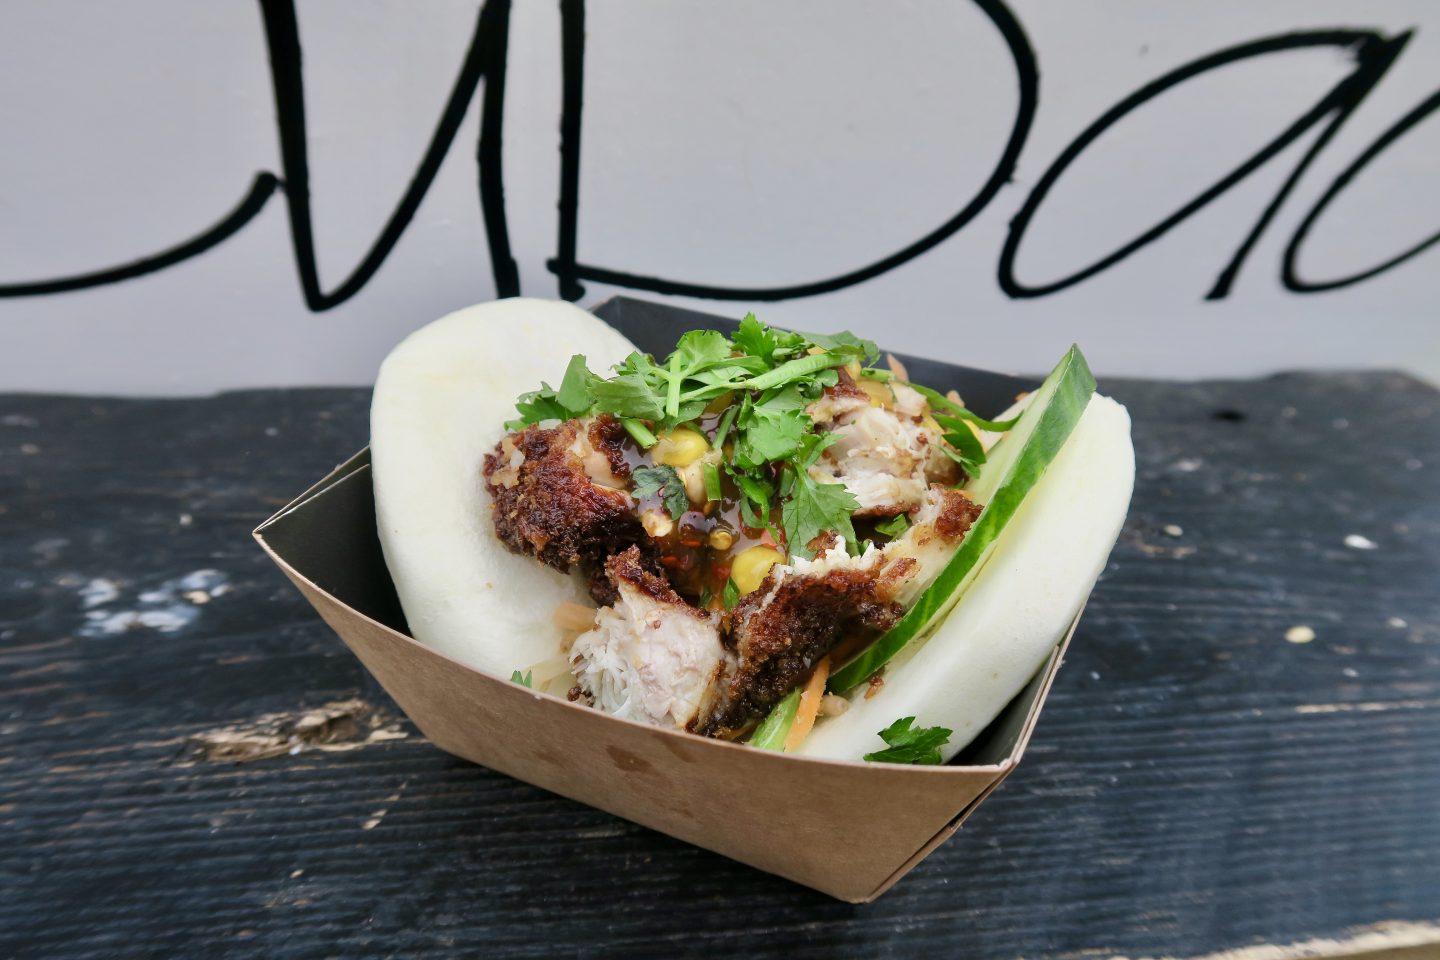 Bao buns at Electric Fields Festival 2018